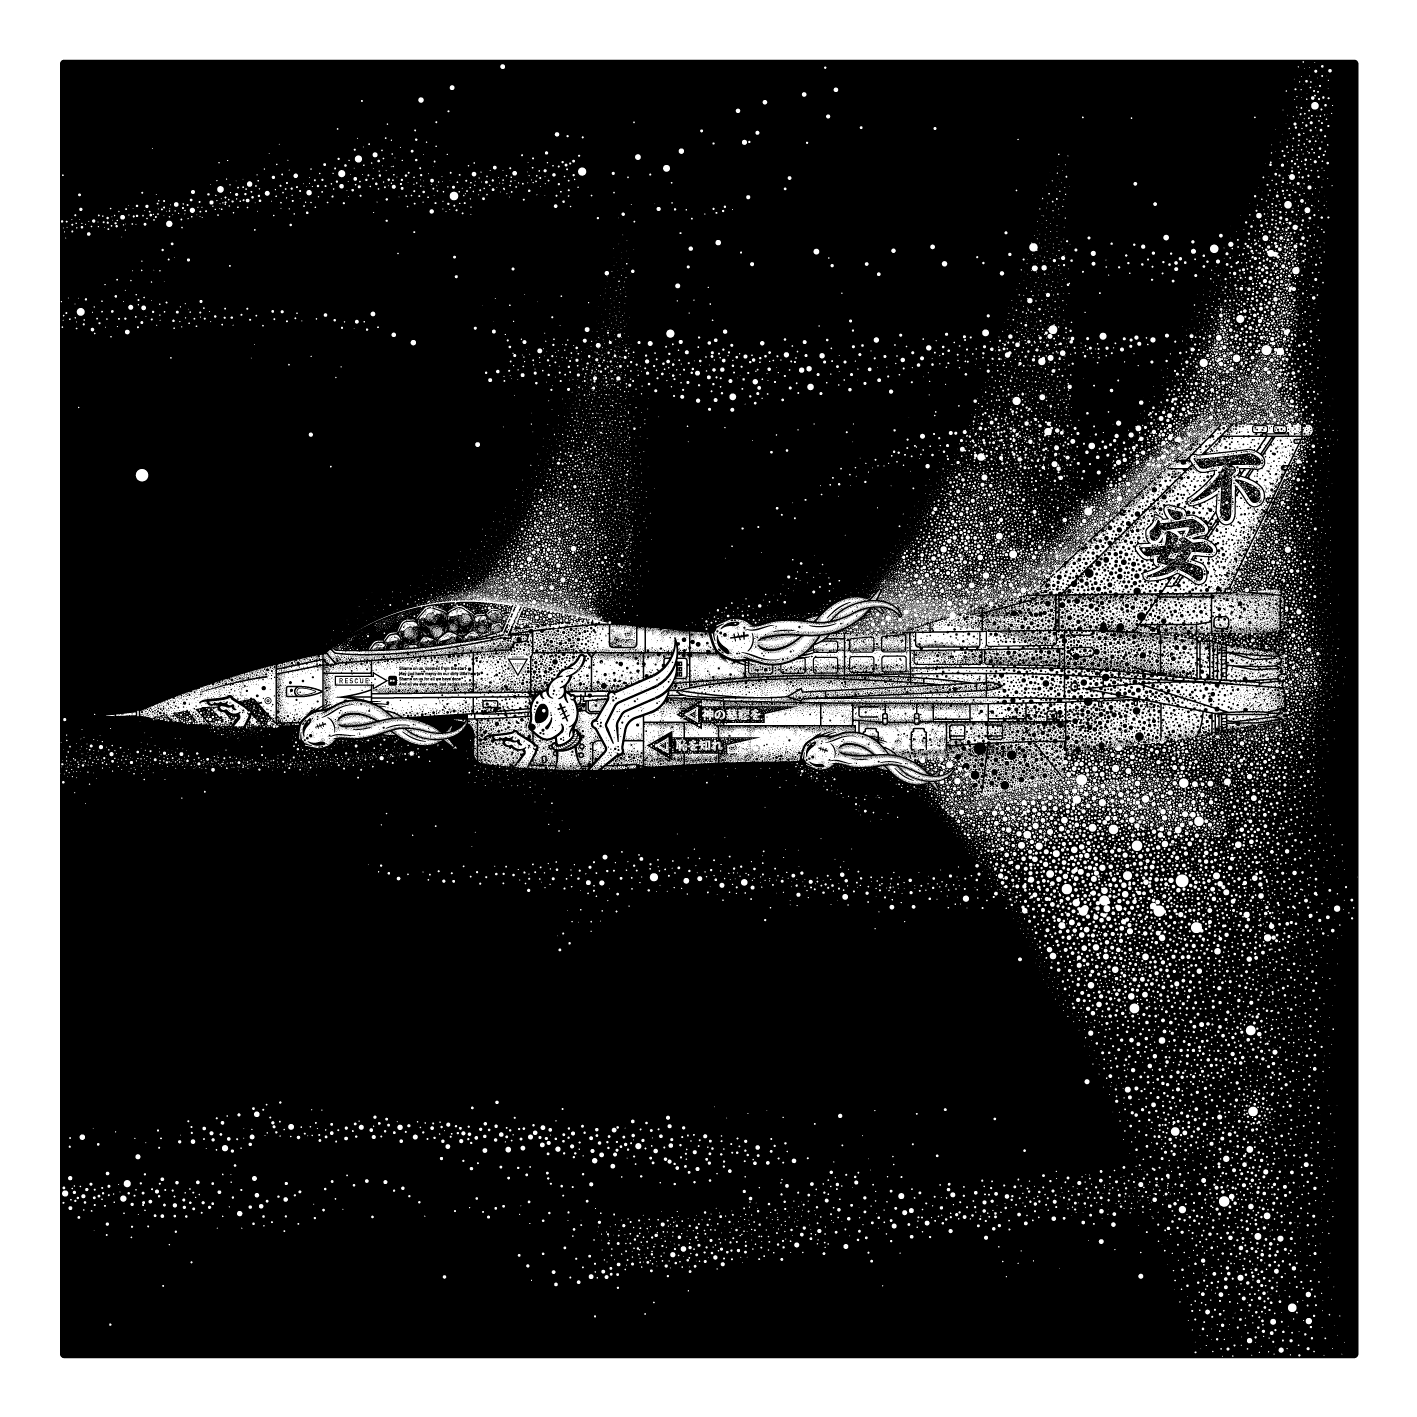 Dreaming Demons: Sonic Boom (F16 Fighting Falcon), Giclée print by Leffe Goldstein. 夢見る悪魔。ソニックブーム。戦闘機。版画。アートプリント。